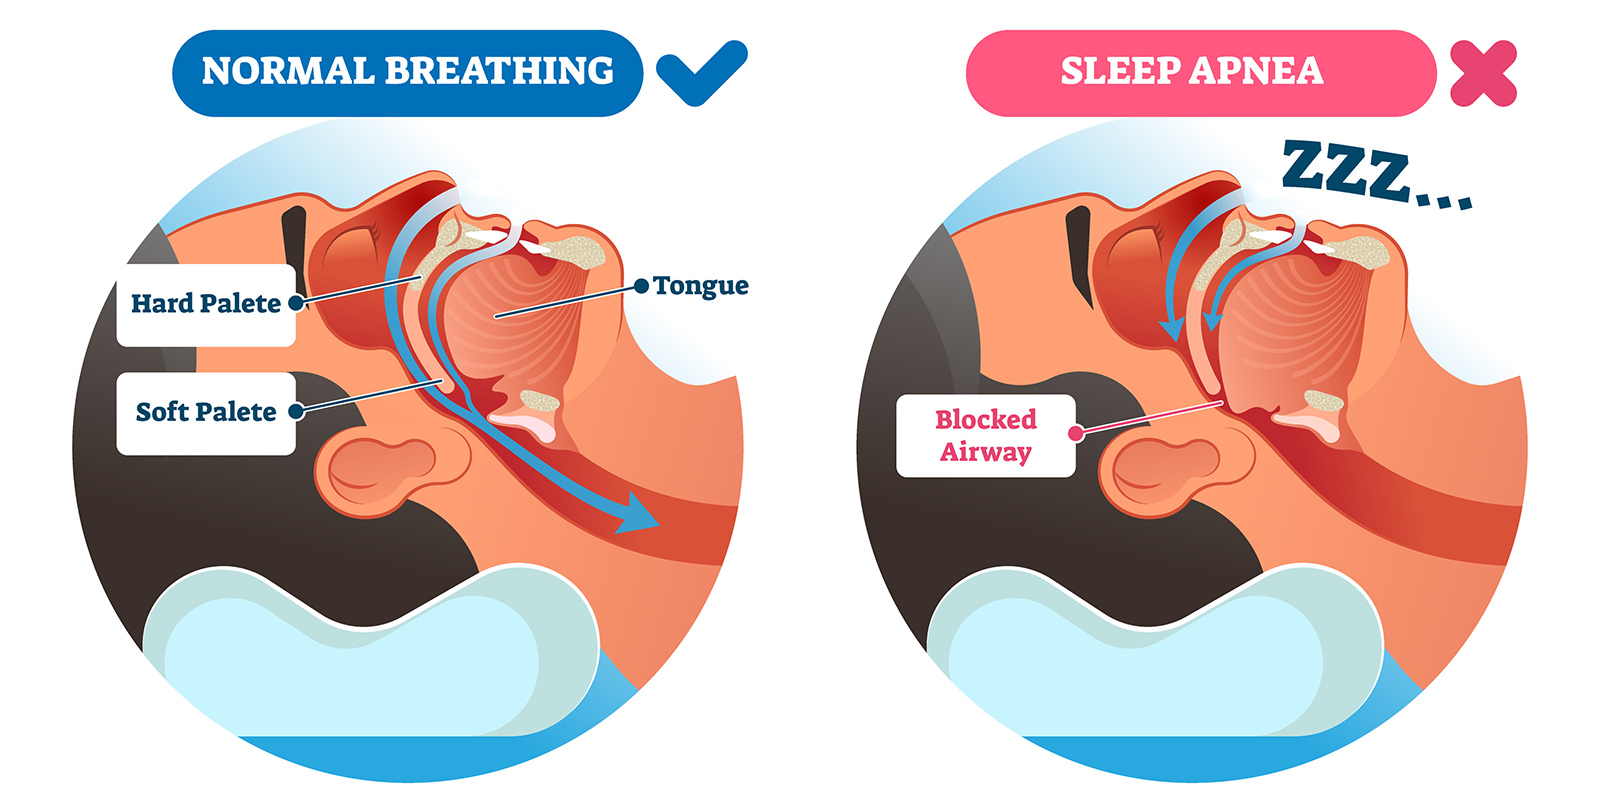 An illustration comparing normal breathing and sleep apnea